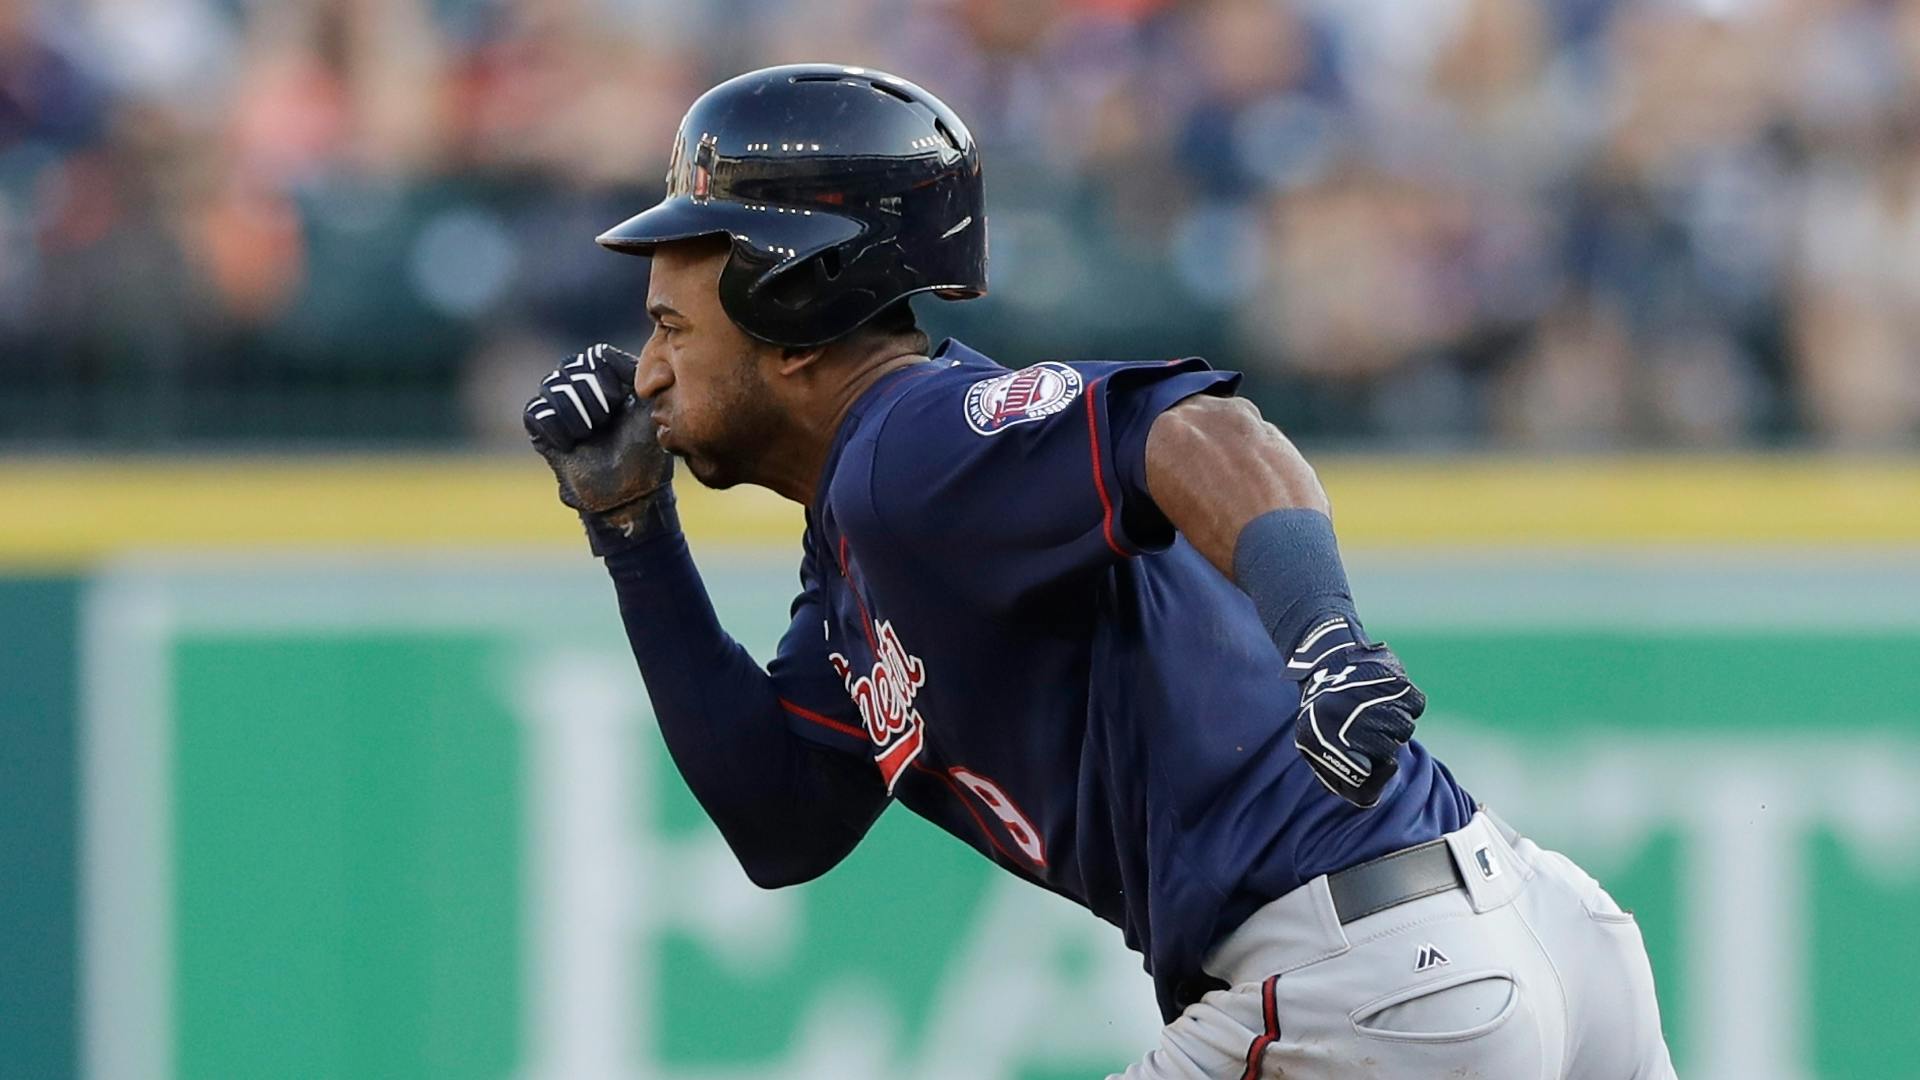 Twins interim general manager Rob Antony says the team achieved its goal -- adding a starting pitching prospect -- by trading Eduardo Nunez on Thursday.